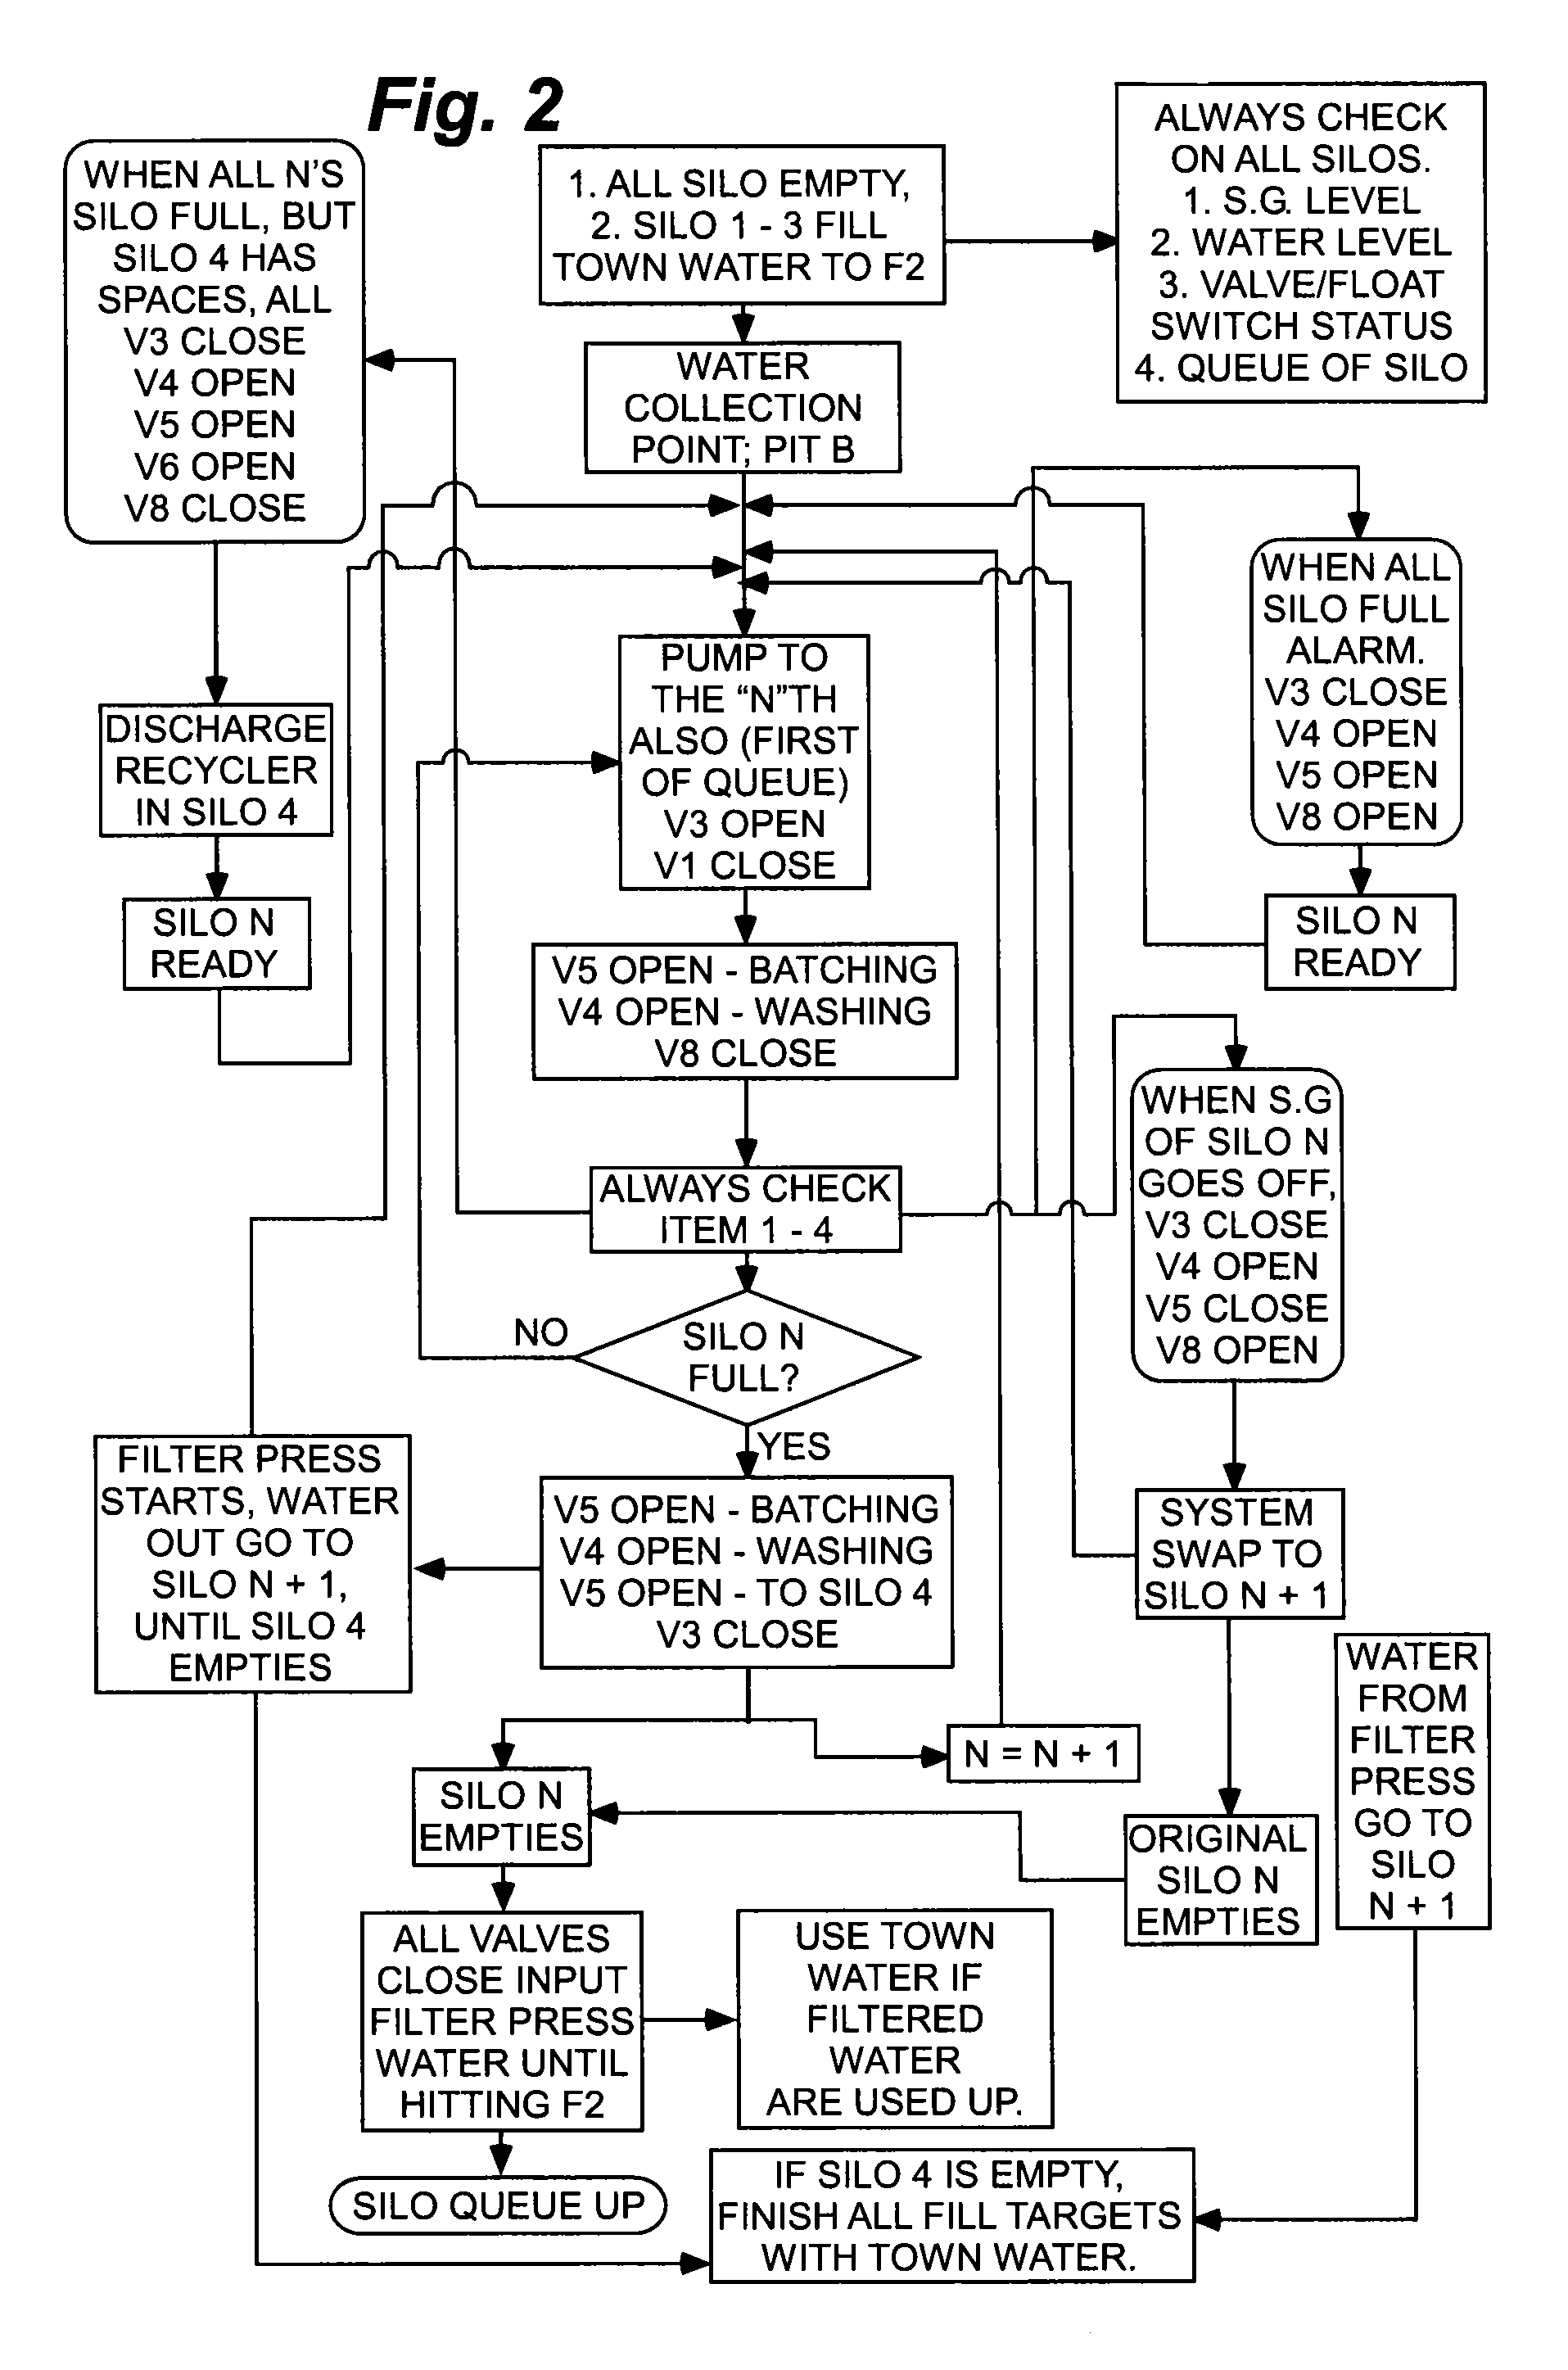 Process for operating a water recovery plant